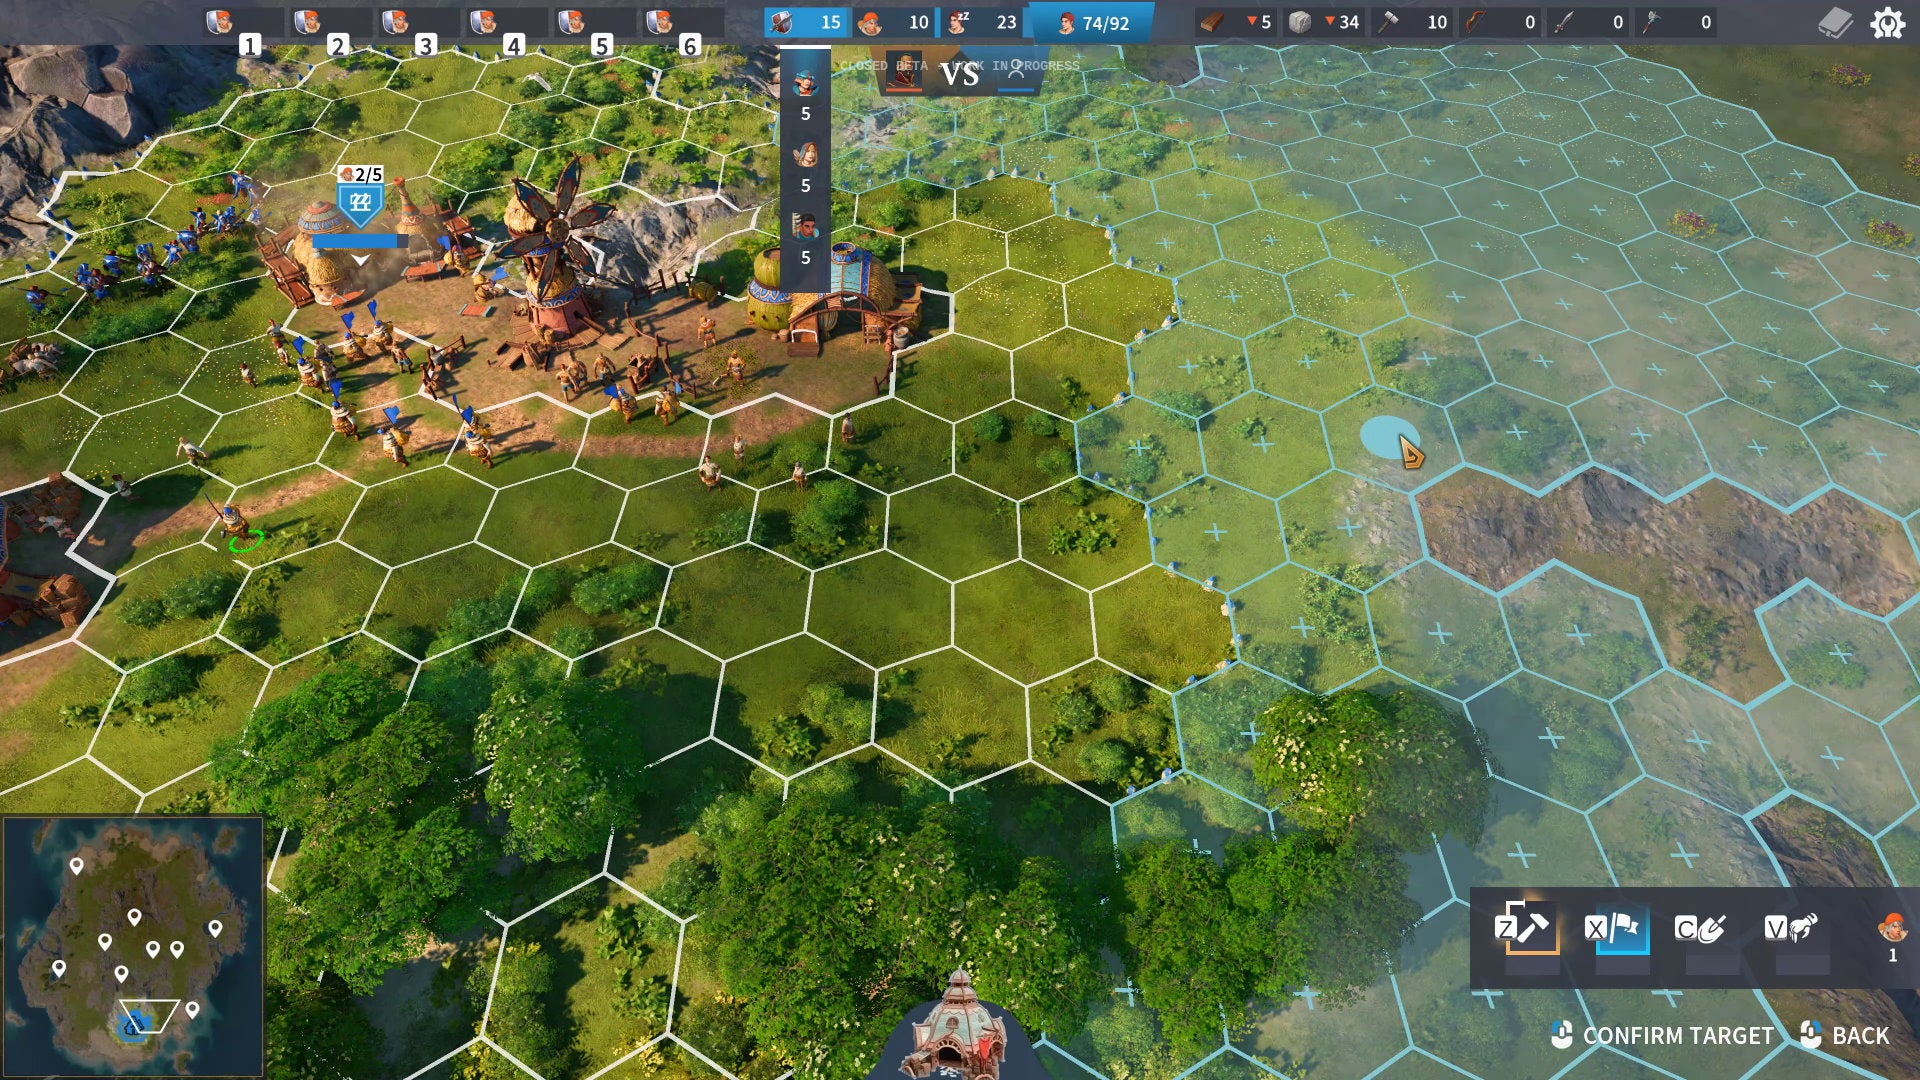 A grassy scene showing a hexagonal grid of available tiles to explore in The Settlers